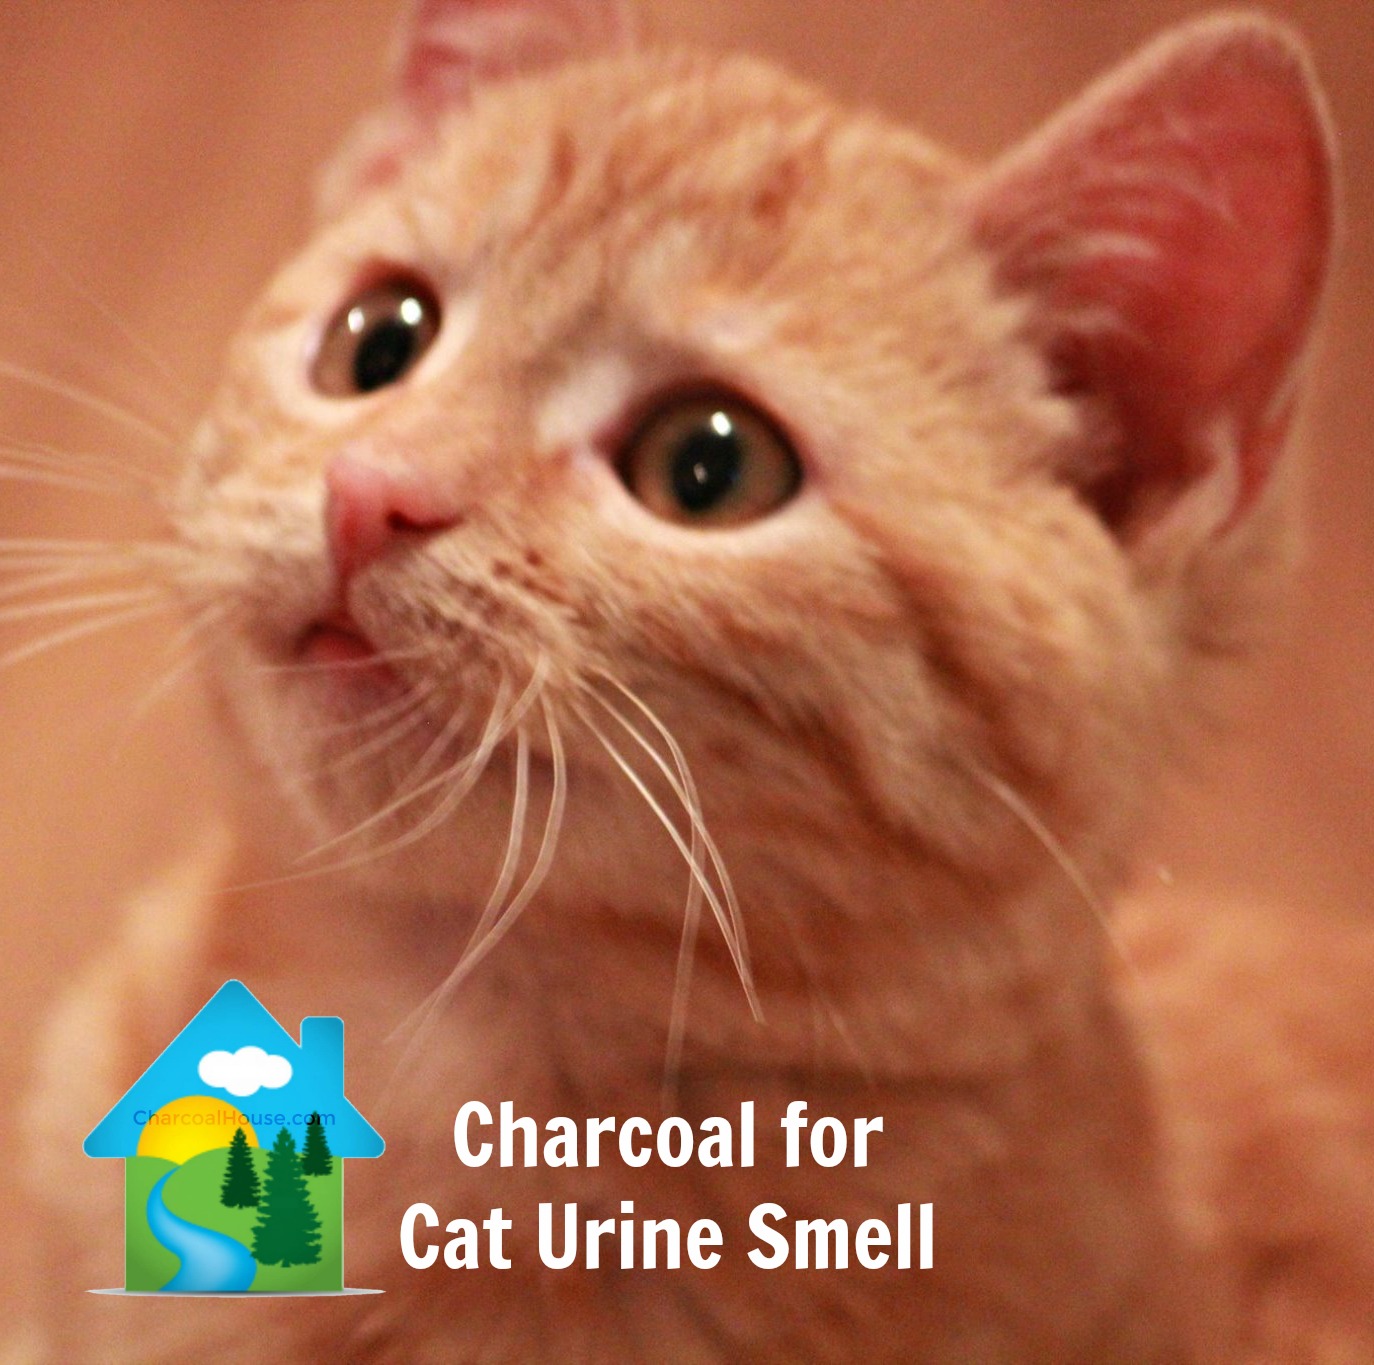 charcoal for cat urine smell - Charcoal for Cat Urine Smell